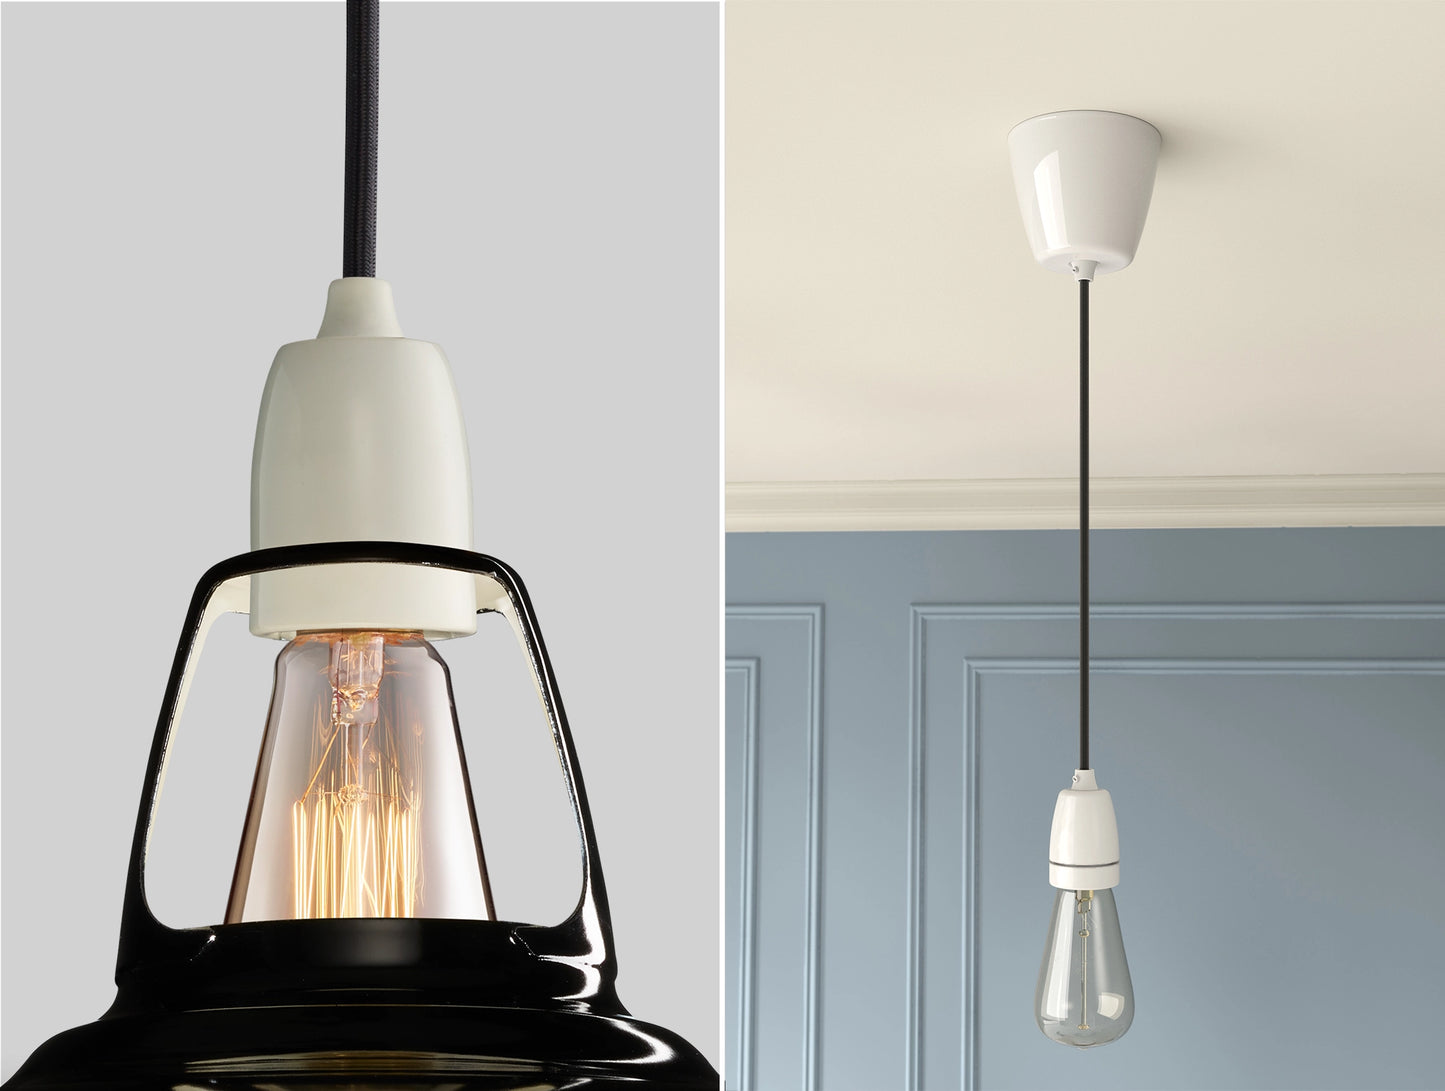 Close up of an E27 Porcelain suspension set on a Jet Black lampshade on the left. On the right, an E27 Porcelain pendant set with a lightbulb is hanging from the ceiling